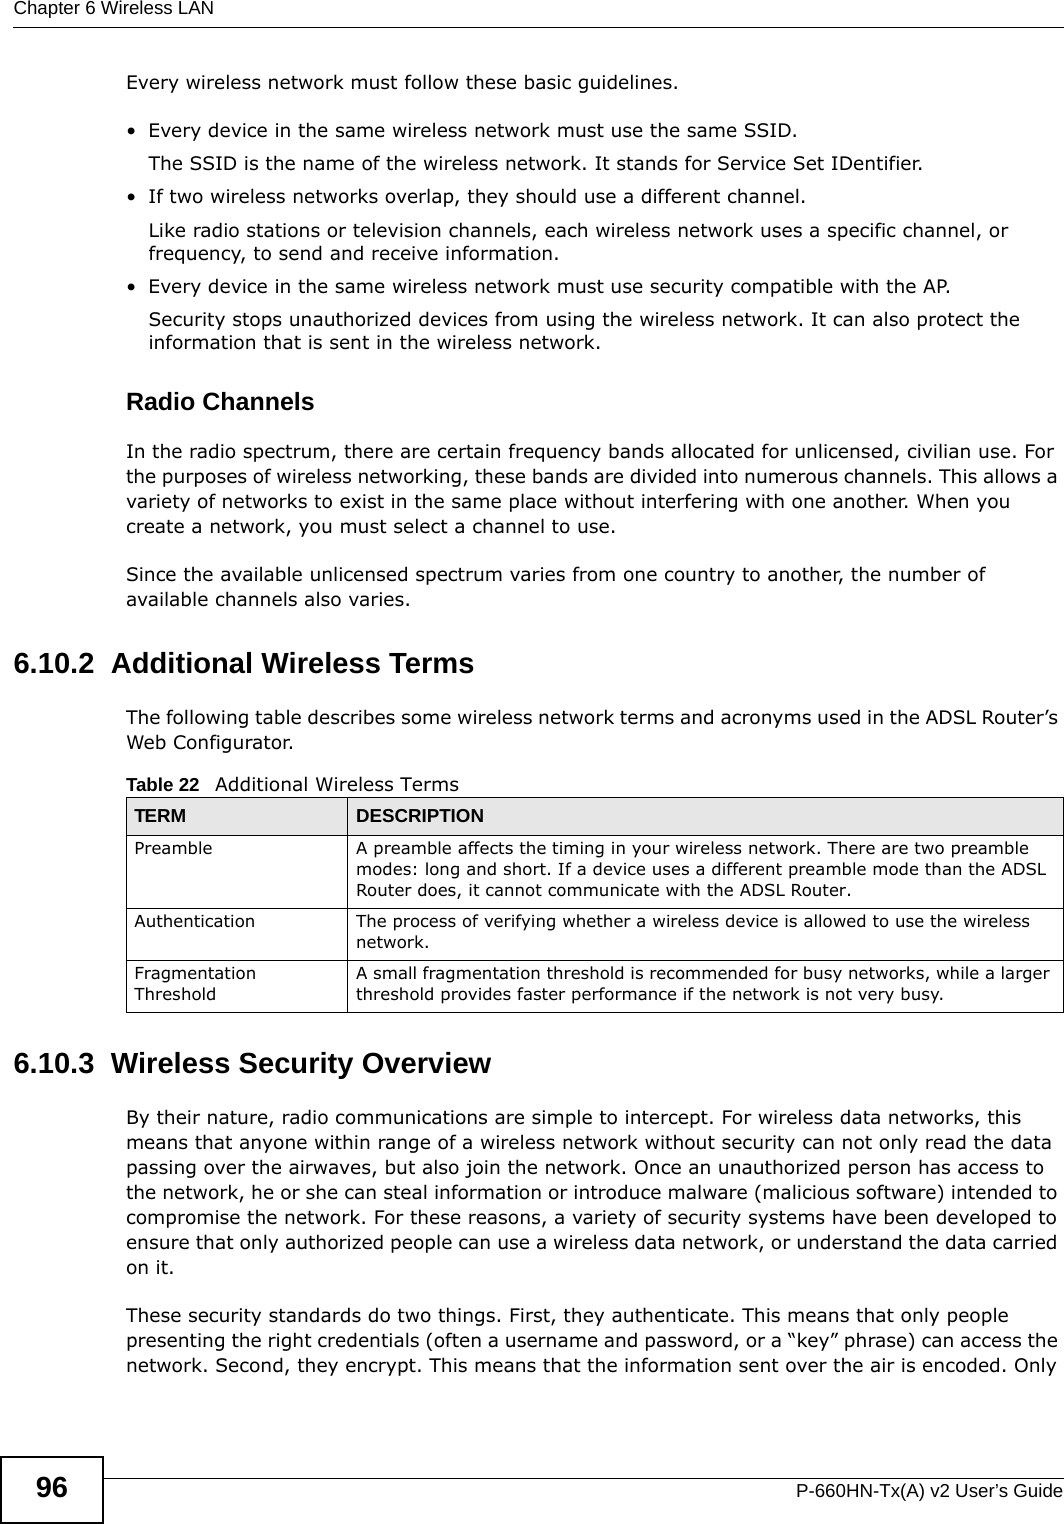 Chapter 6 Wireless LANP-660HN-Tx(A) v2 User’s Guide96Every wireless network must follow these basic guidelines.• Every device in the same wireless network must use the same SSID.The SSID is the name of the wireless network. It stands for Service Set IDentifier.• If two wireless networks overlap, they should use a different channel.Like radio stations or television channels, each wireless network uses a specific channel, or frequency, to send and receive information.• Every device in the same wireless network must use security compatible with the AP.Security stops unauthorized devices from using the wireless network. It can also protect the information that is sent in the wireless network.Radio ChannelsIn the radio spectrum, there are certain frequency bands allocated for unlicensed, civilian use. For the purposes of wireless networking, these bands are divided into numerous channels. This allows a variety of networks to exist in the same place without interfering with one another. When you create a network, you must select a channel to use. Since the available unlicensed spectrum varies from one country to another, the number of available channels also varies. 6.10.2  Additional Wireless TermsThe following table describes some wireless network terms and acronyms used in the ADSL Router’s Web Configurator.6.10.3  Wireless Security OverviewBy their nature, radio communications are simple to intercept. For wireless data networks, this means that anyone within range of a wireless network without security can not only read the data passing over the airwaves, but also join the network. Once an unauthorized person has access to the network, he or she can steal information or introduce malware (malicious software) intended to compromise the network. For these reasons, a variety of security systems have been developed to ensure that only authorized people can use a wireless data network, or understand the data carried on it.These security standards do two things. First, they authenticate. This means that only people presenting the right credentials (often a username and password, or a “key” phrase) can access the network. Second, they encrypt. This means that the information sent over the air is encoded. Only Table 22   Additional Wireless TermsTERM DESCRIPTIONPreamble A preamble affects the timing in your wireless network. There are two preamble modes: long and short. If a device uses a different preamble mode than the ADSL Router does, it cannot communicate with the ADSL Router.Authentication The process of verifying whether a wireless device is allowed to use the wireless network.Fragmentation ThresholdA small fragmentation threshold is recommended for busy networks, while a larger threshold provides faster performance if the network is not very busy.